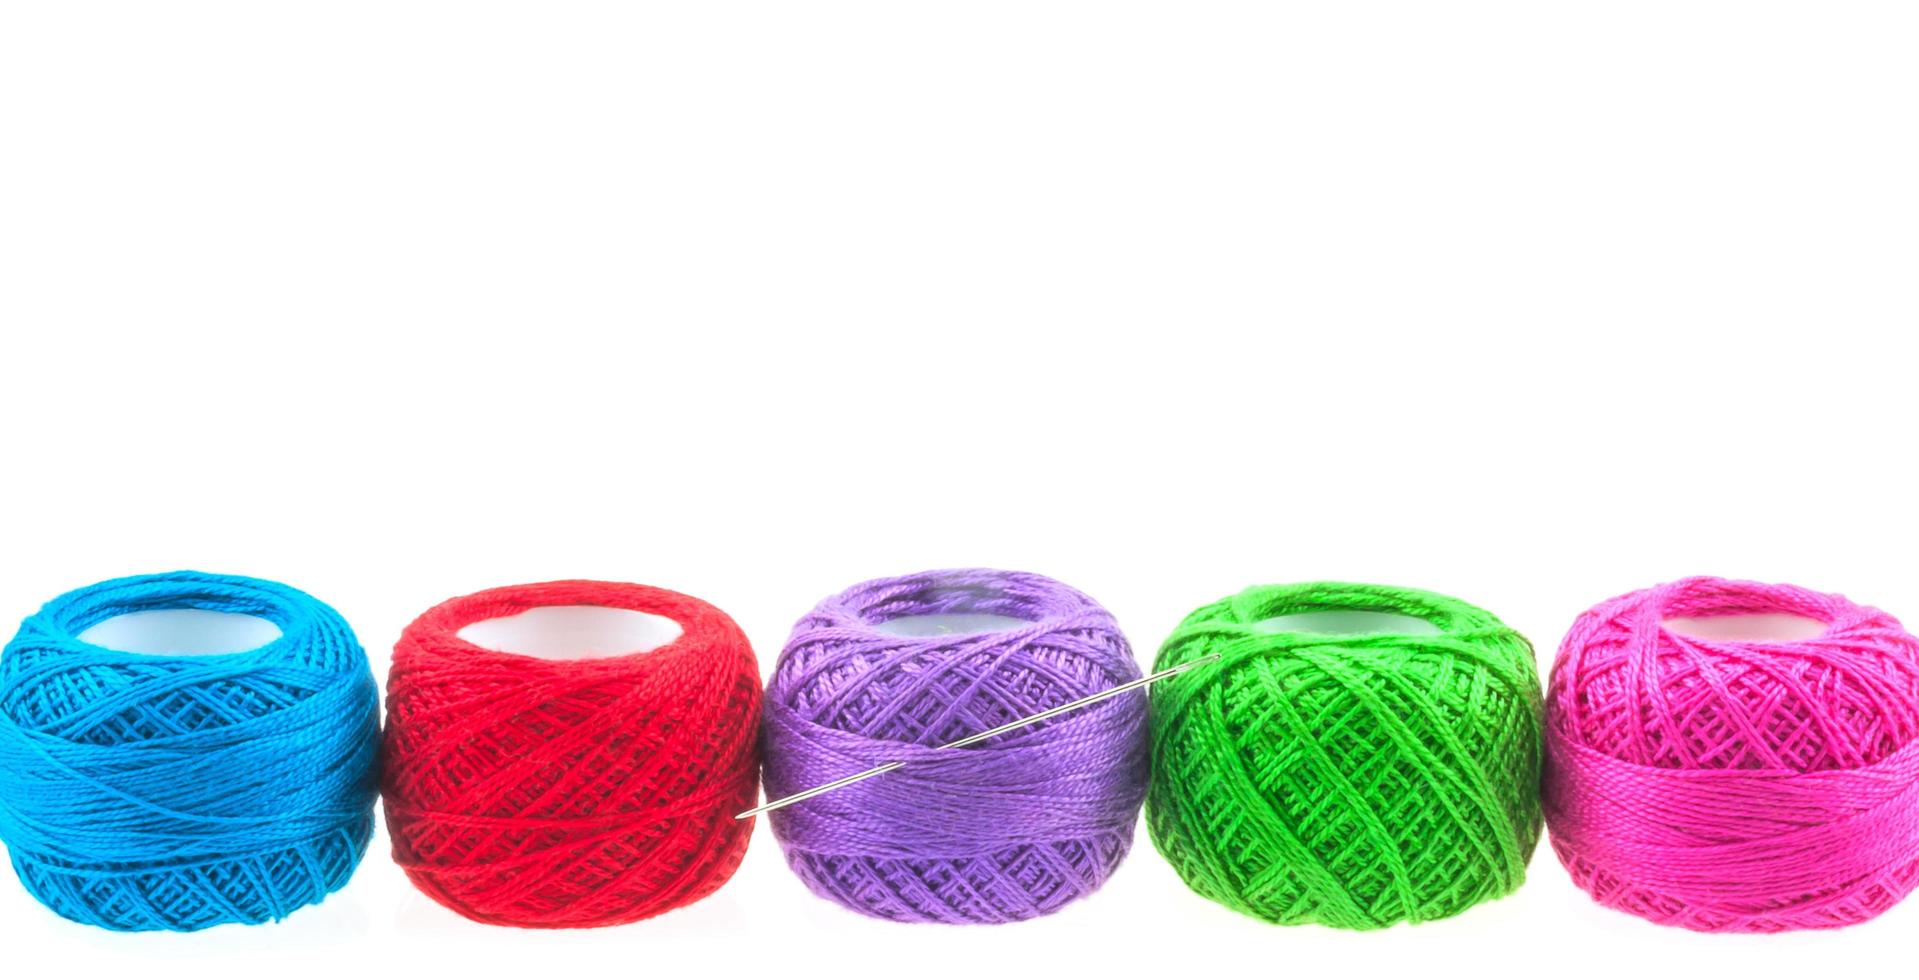 Yarn balls over white for background use photo